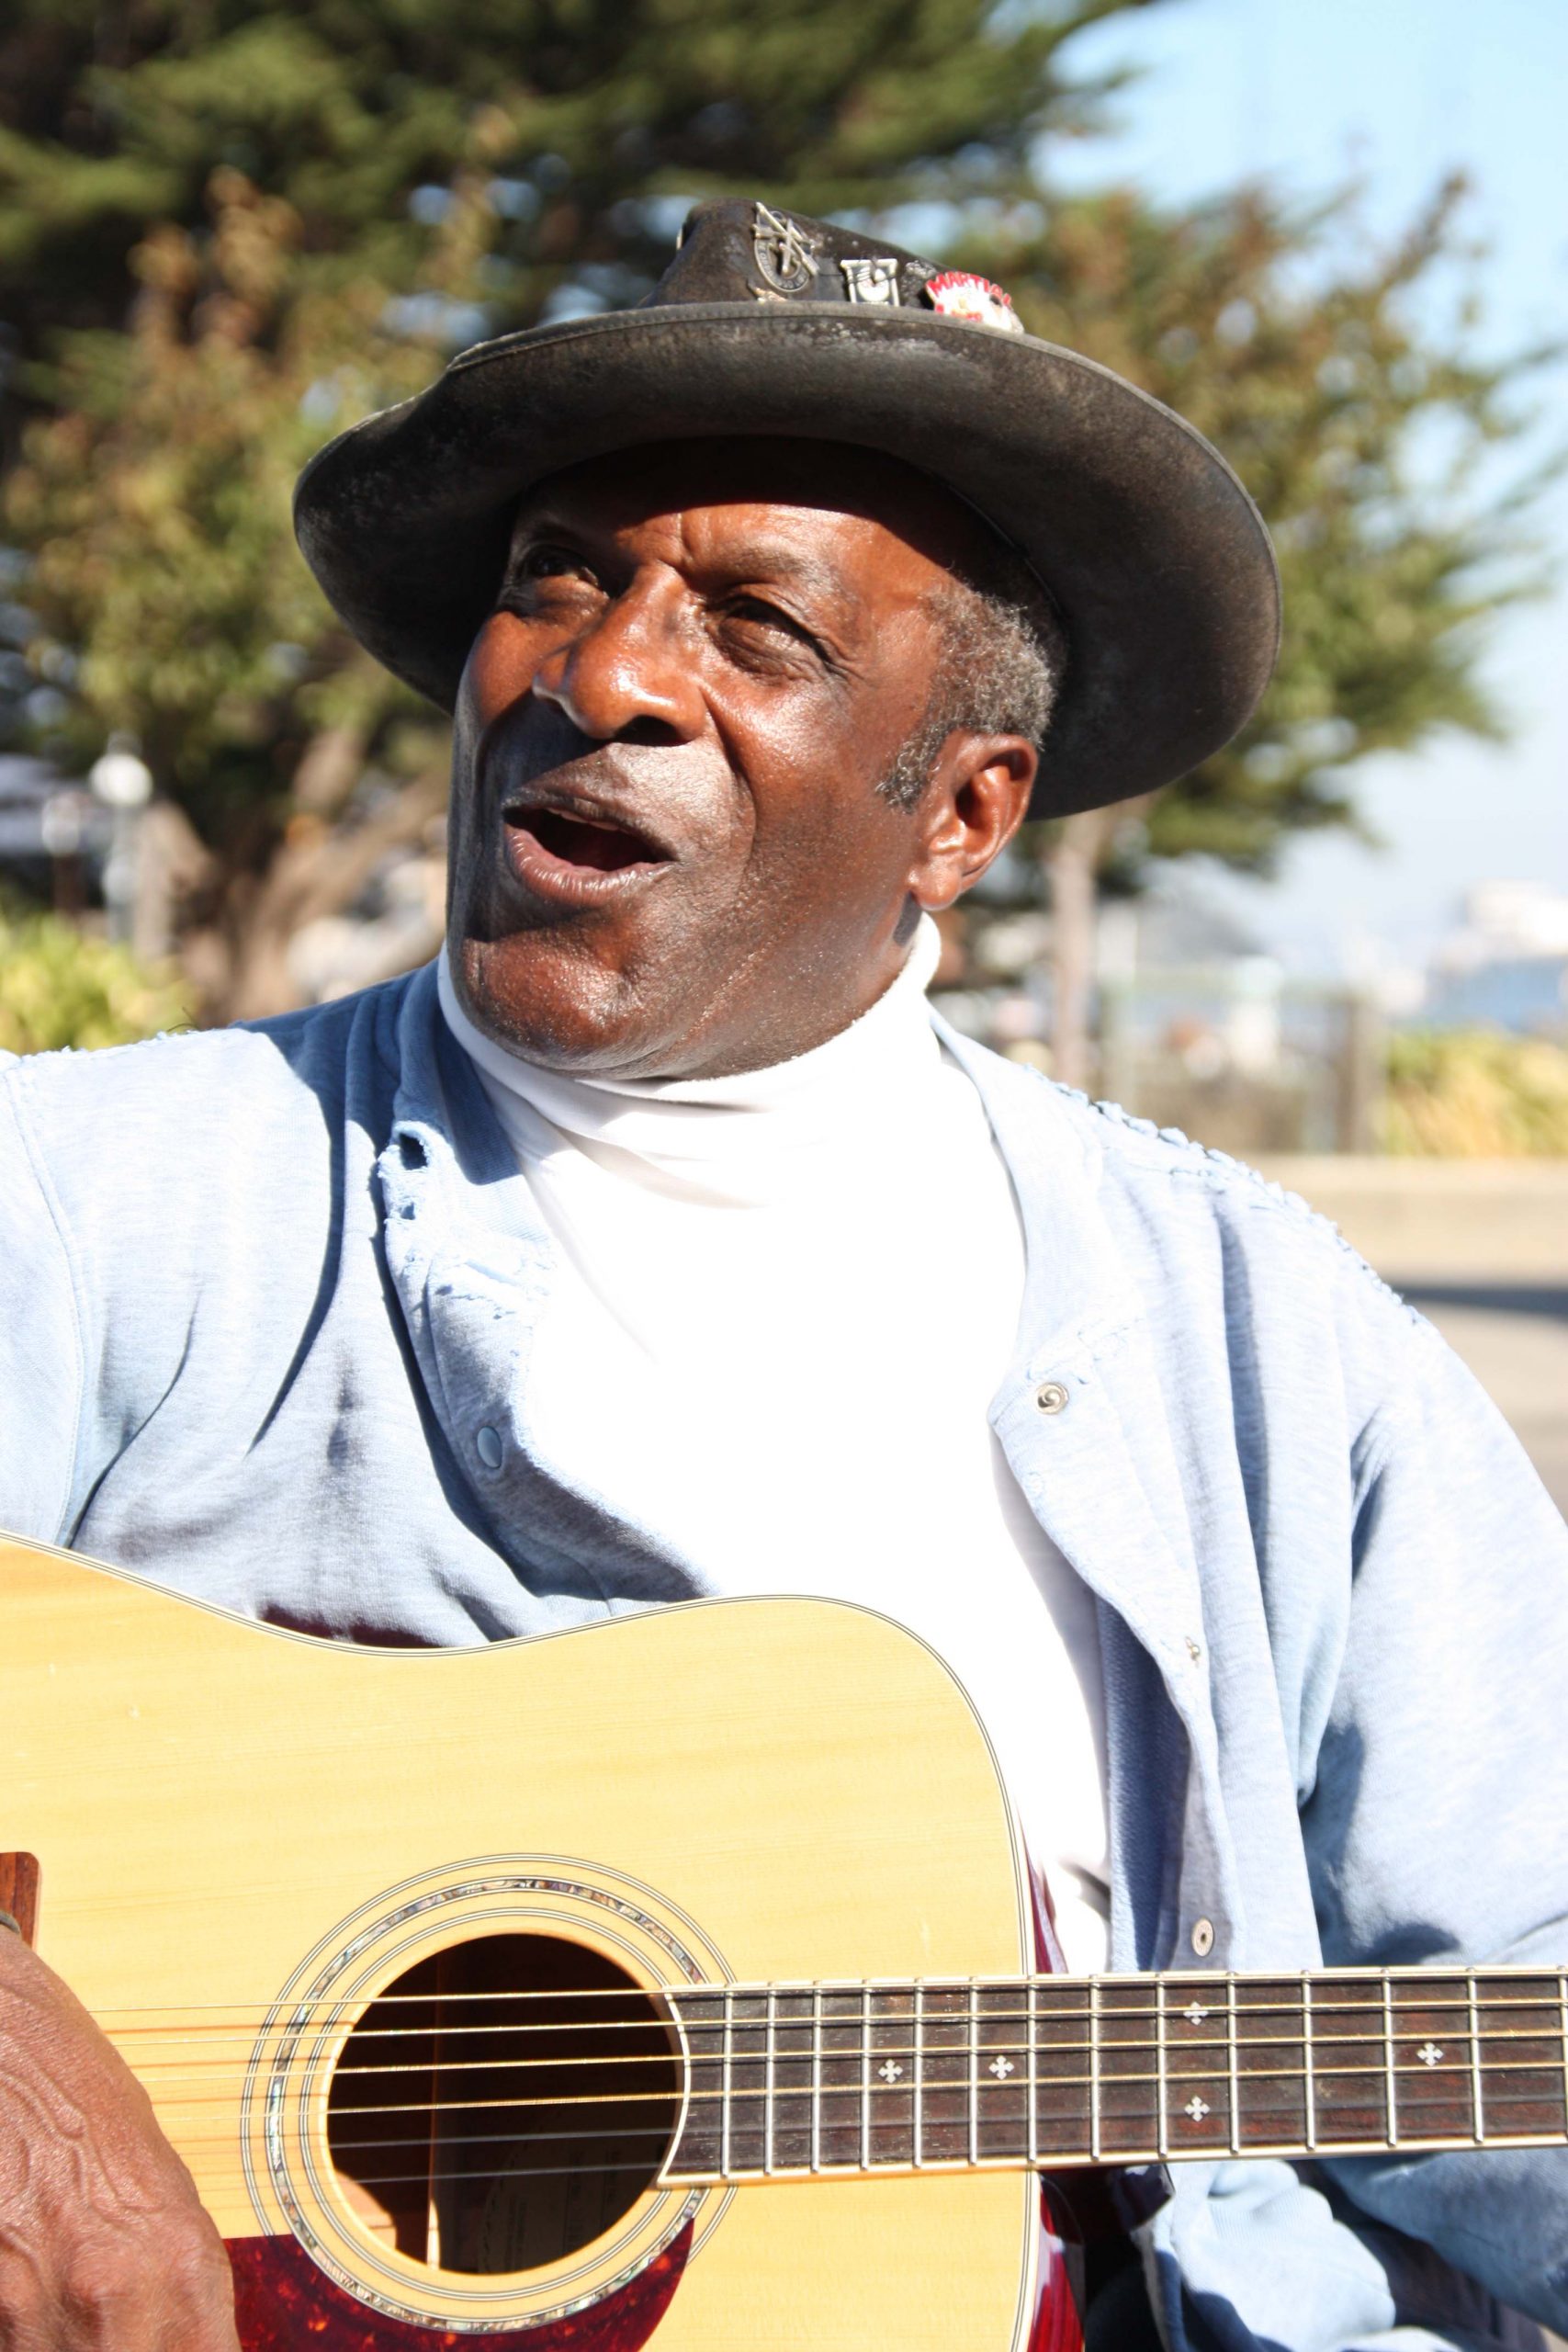 San Francisco’s Iconic Street Performers